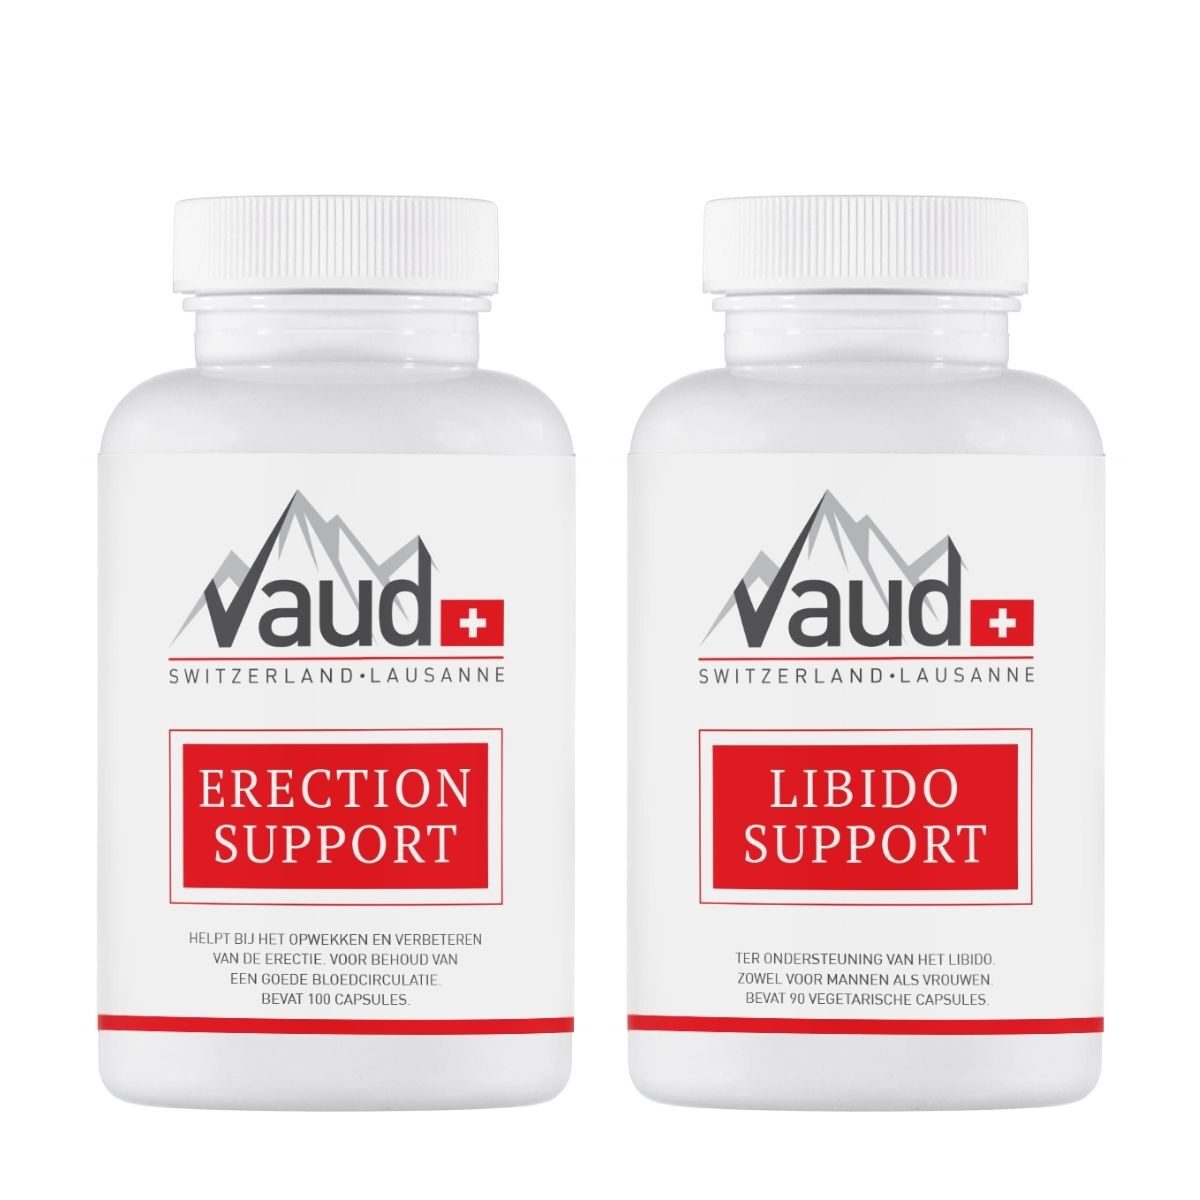 Erection support + libido support